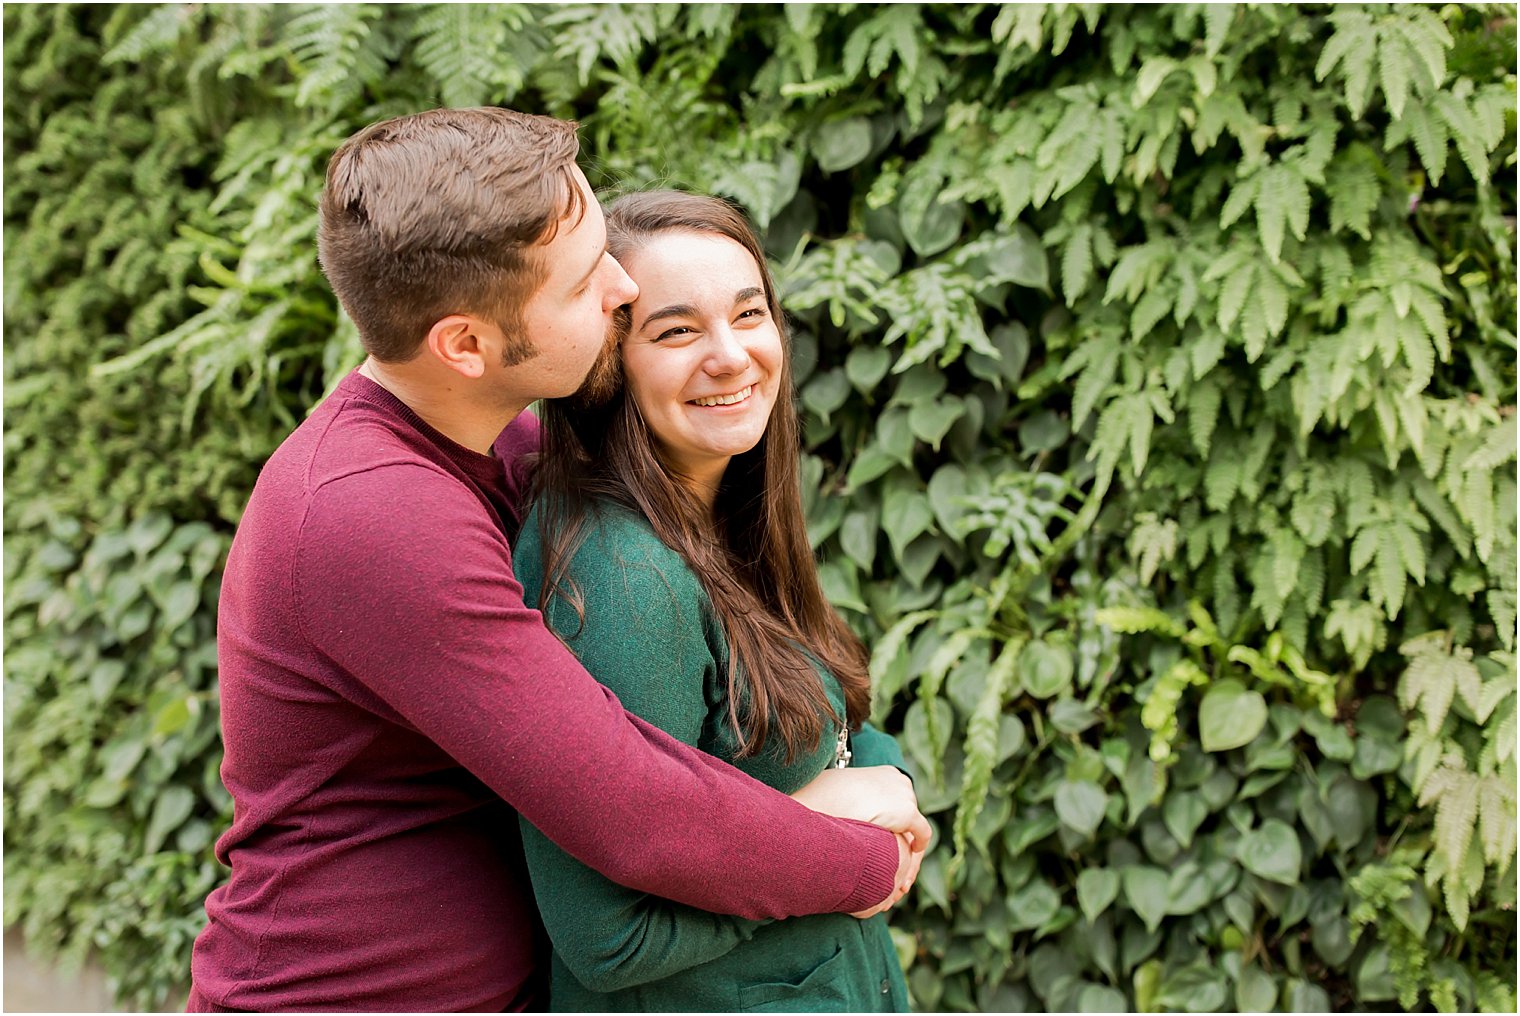 Candid moment in front of the Green Wall at Longwood | Photo by Idalia Photography